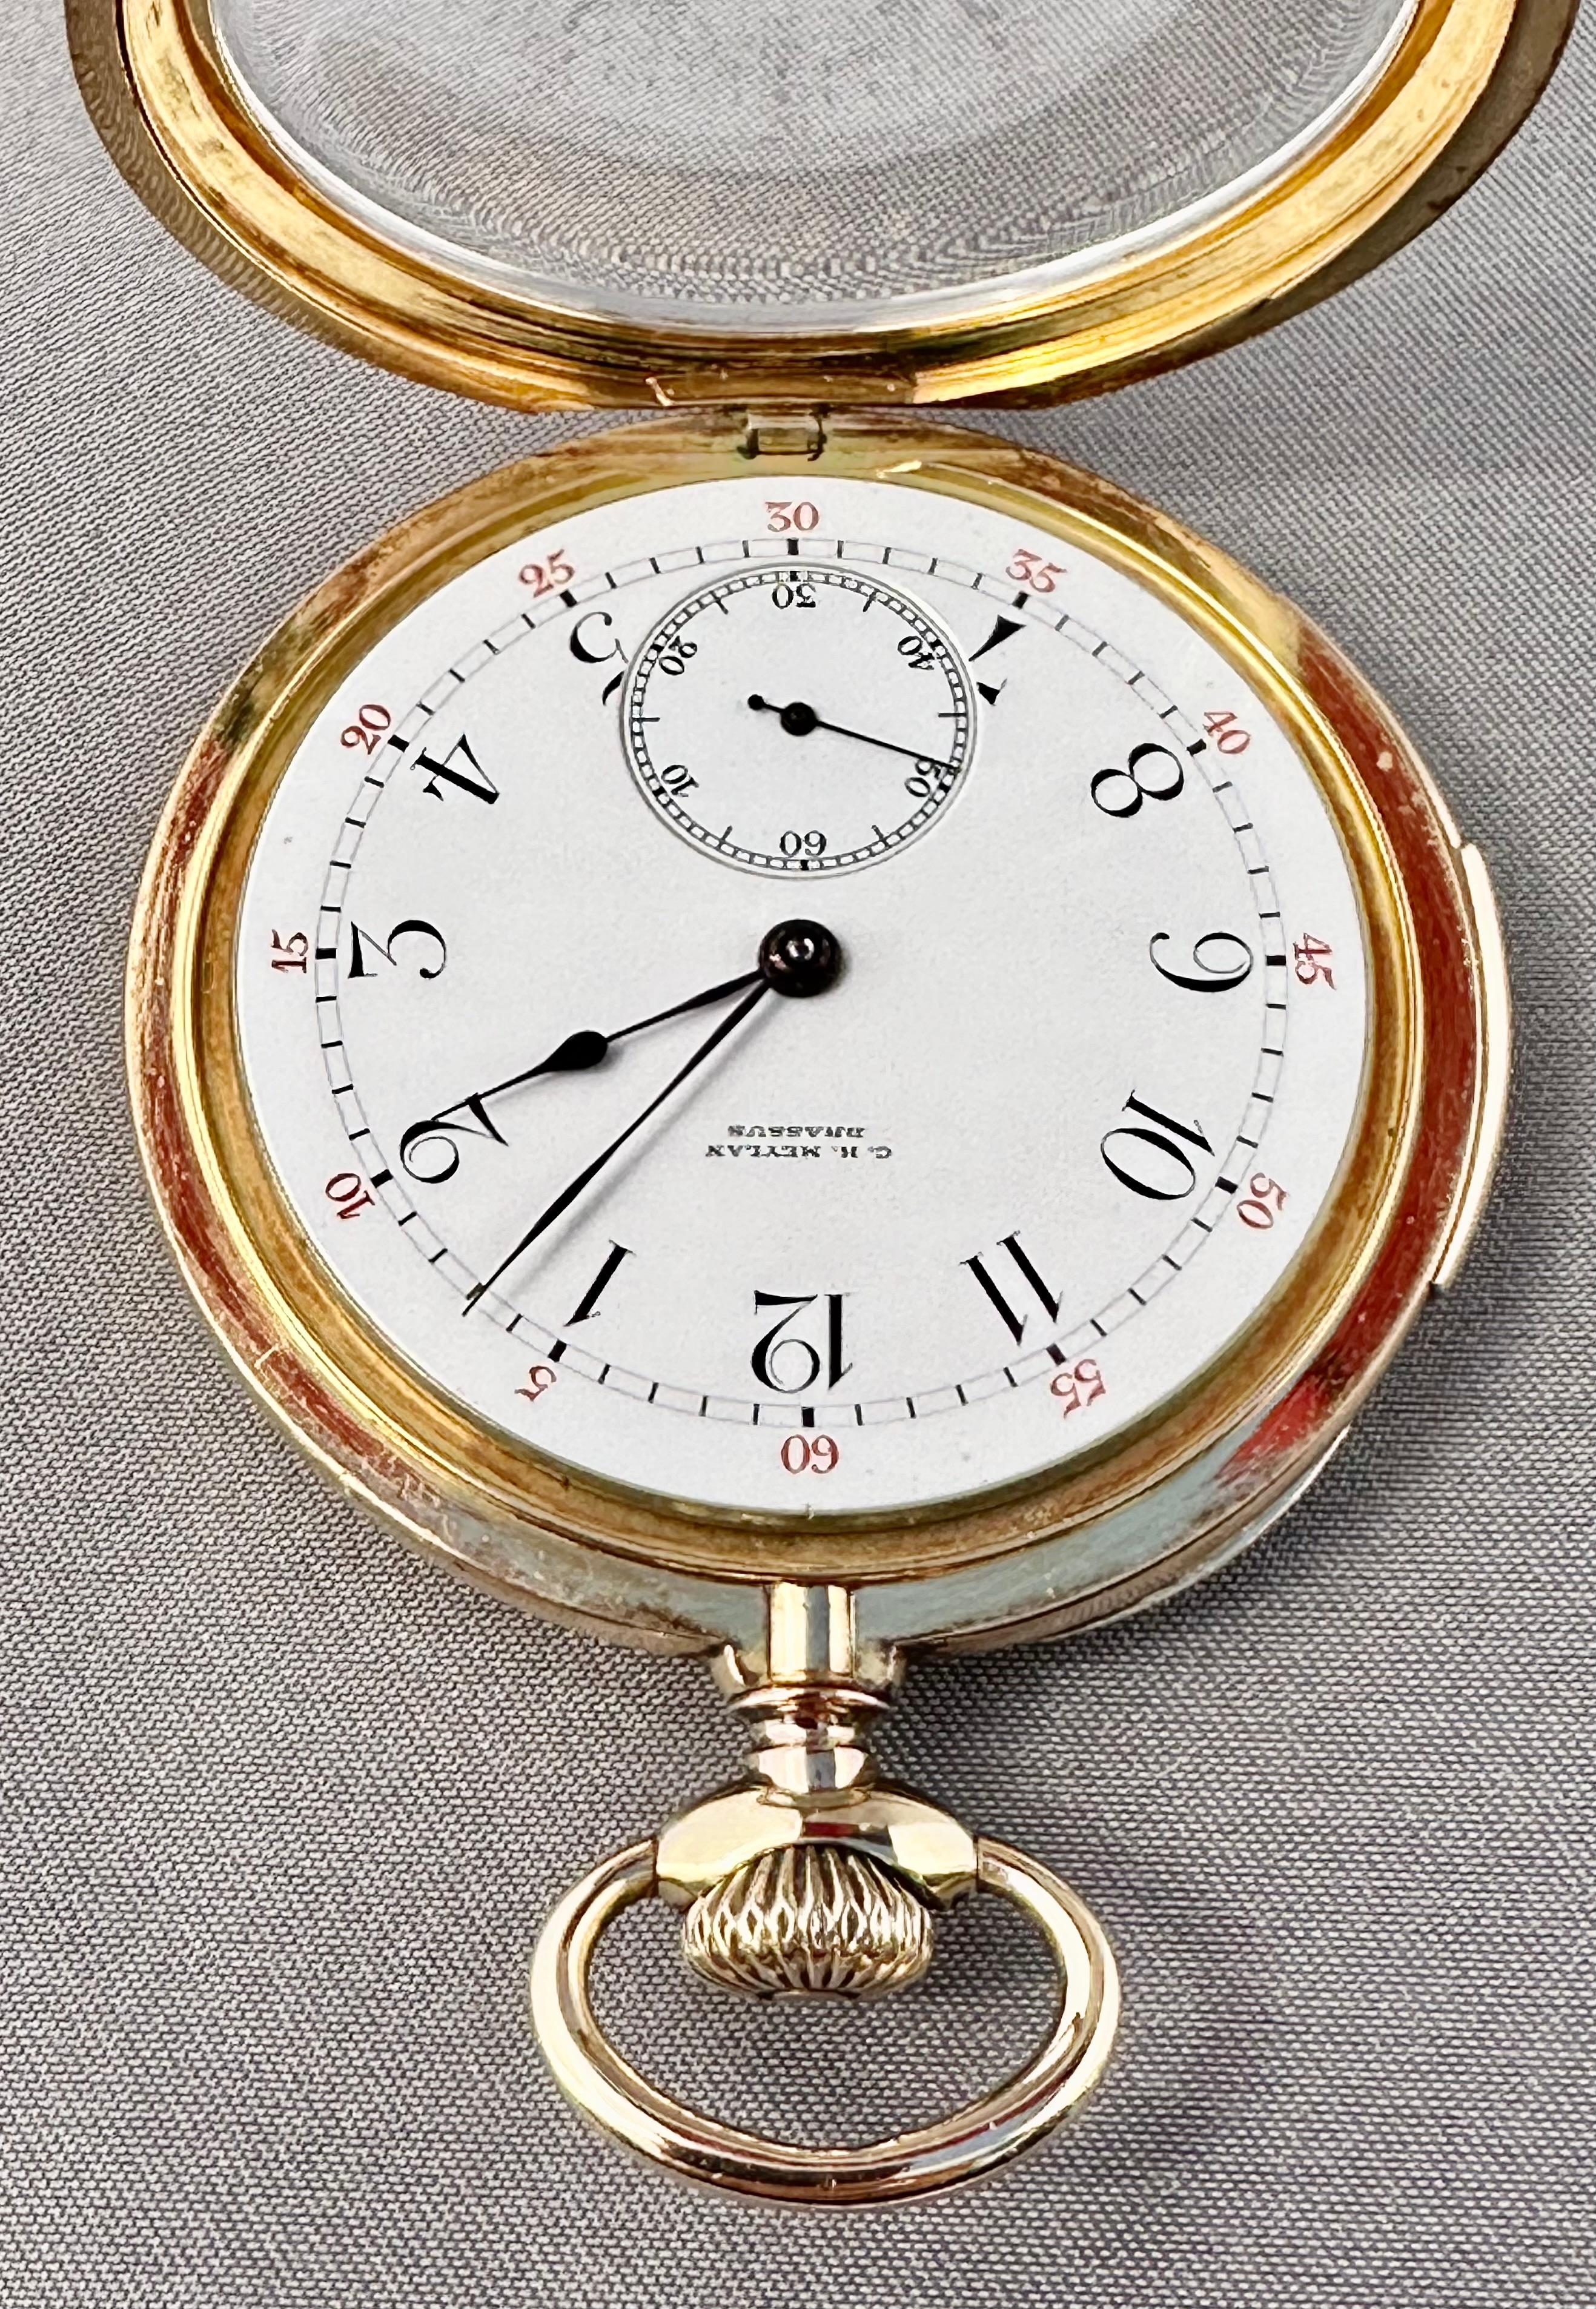 C.H. Meylan 18K Gold Keyless Lever Minute Repeater Half Hunter Pocket Watch Circa 1890's

Dial: The white enamel dial with Arabic numerals, and minutes in red, the sub dial for the seconds at six o'clock. The original blued steel  hands with blued